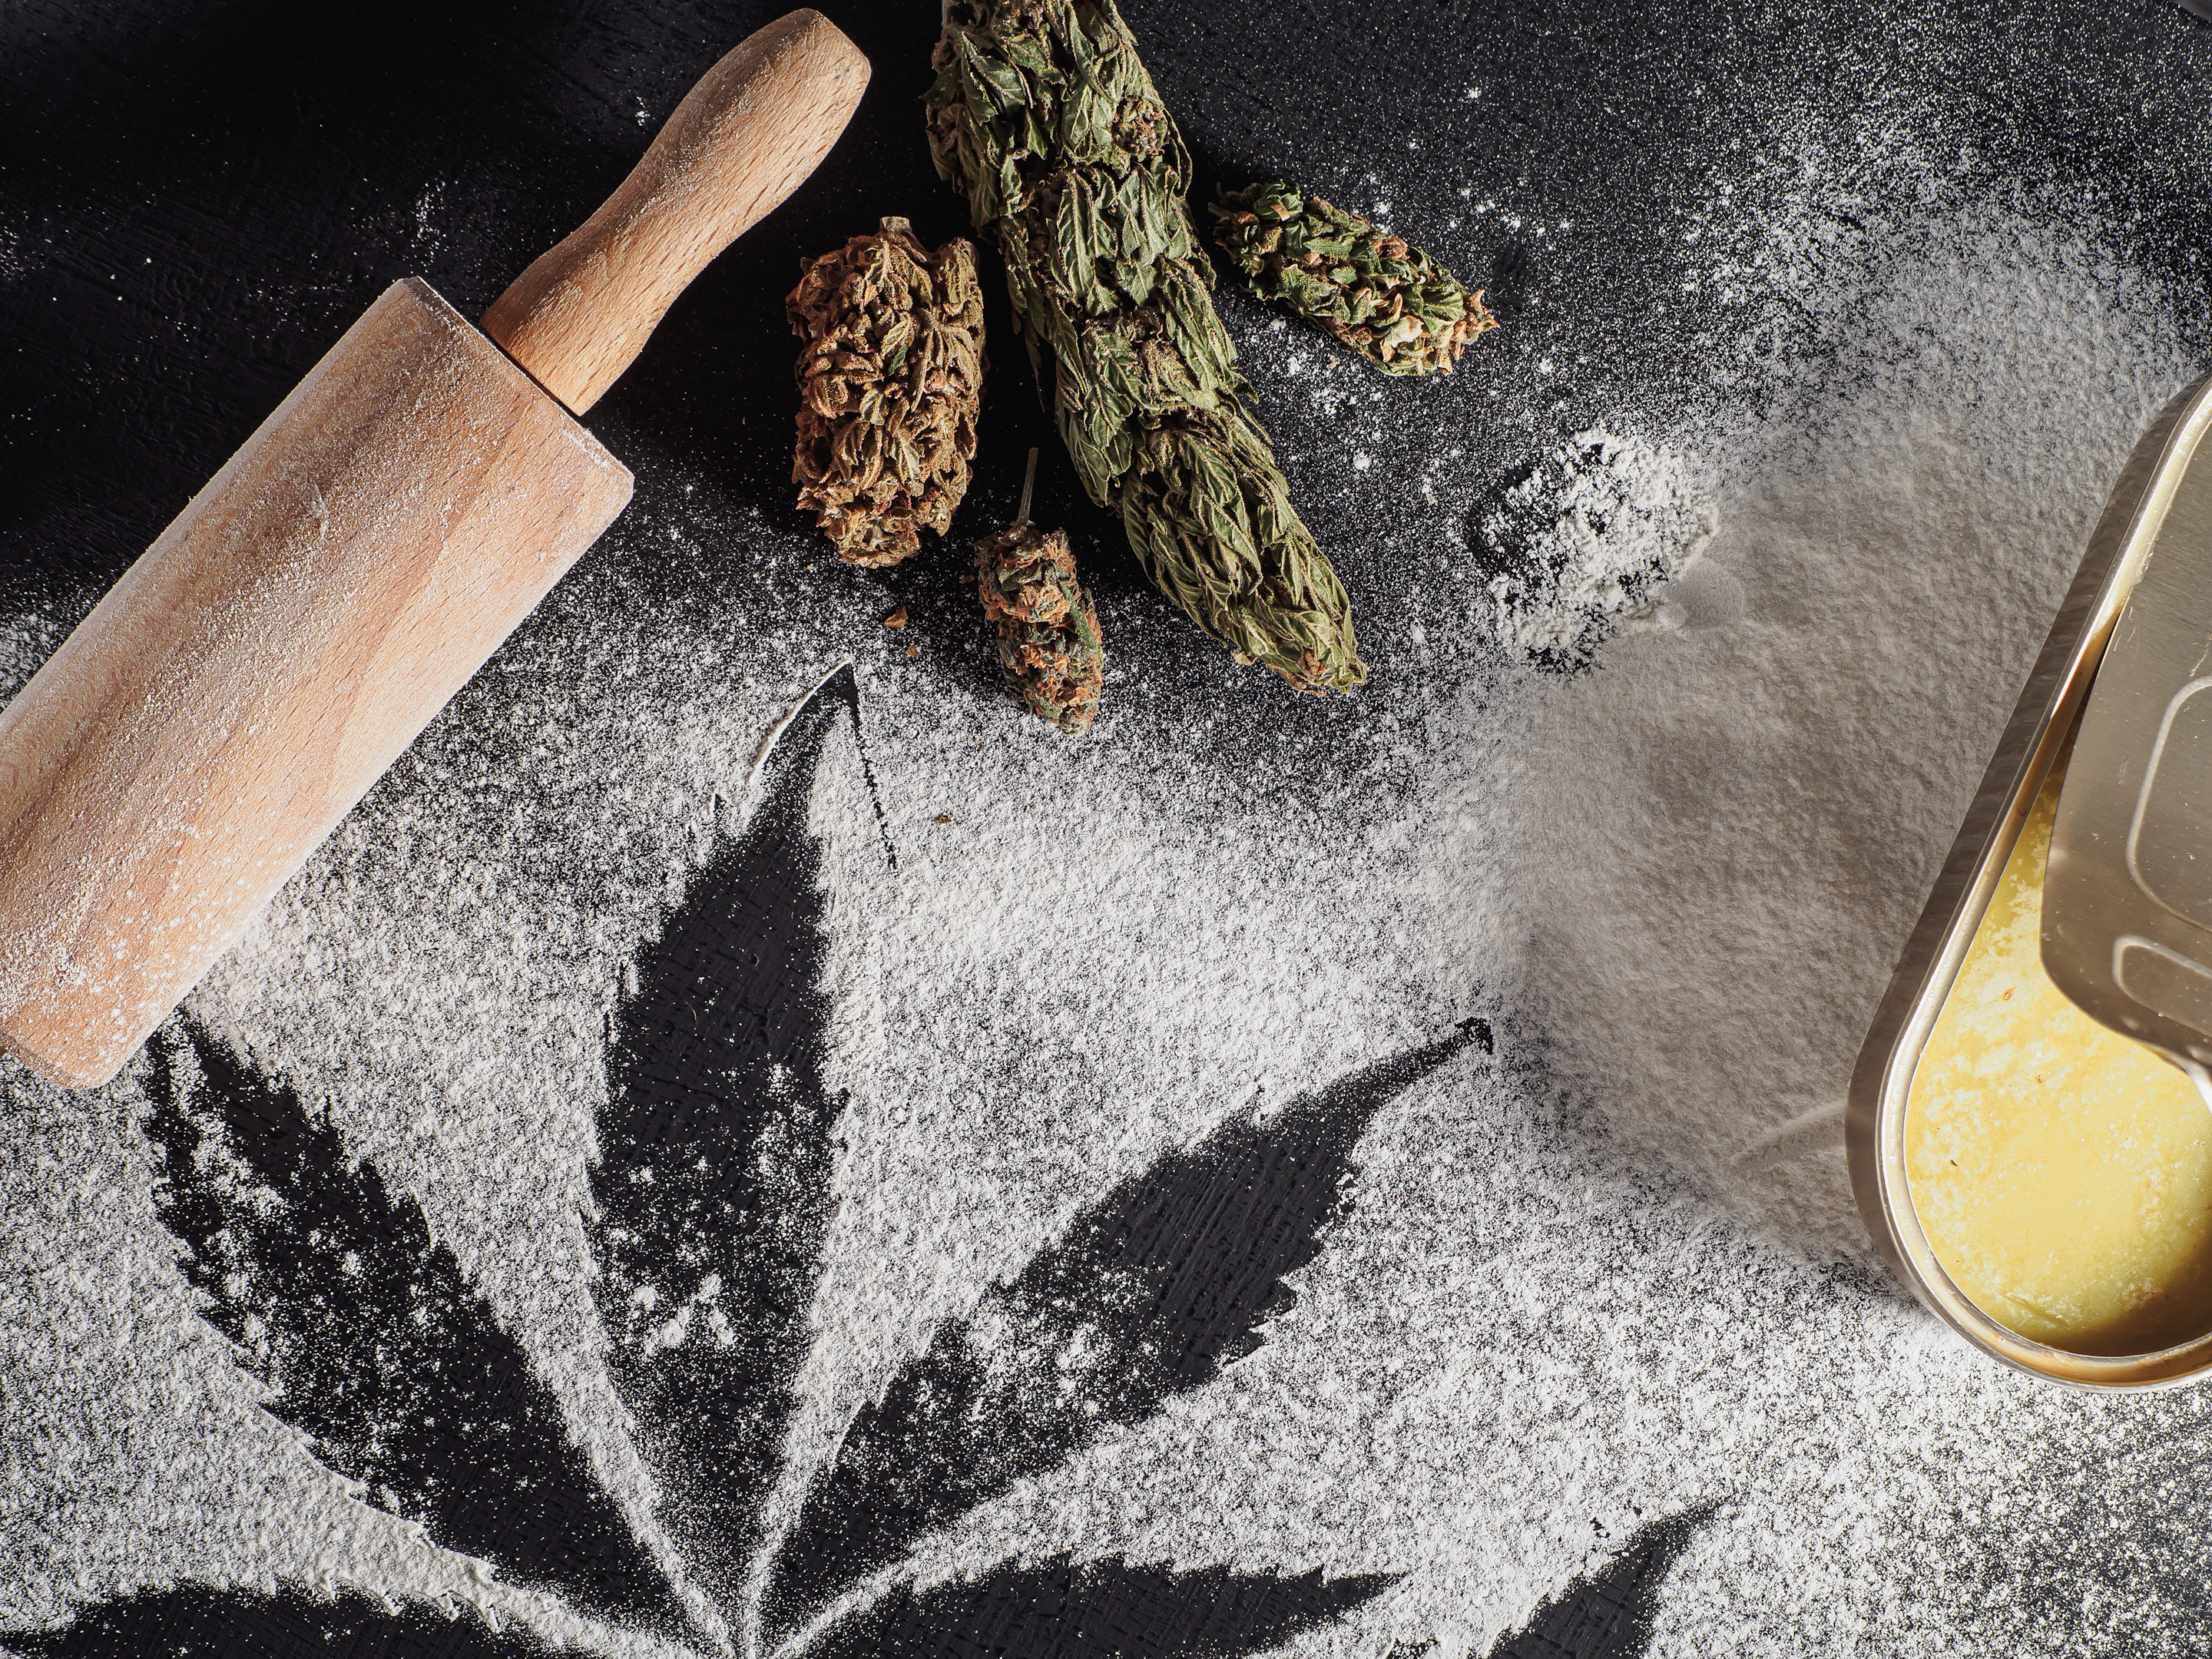 Depending on the substance use, some use various forms of Delta 9, Delta 8, or marijuana for even weight loss. But to make butter, people decarb flower by putting it on a cookie sheet and heating them.